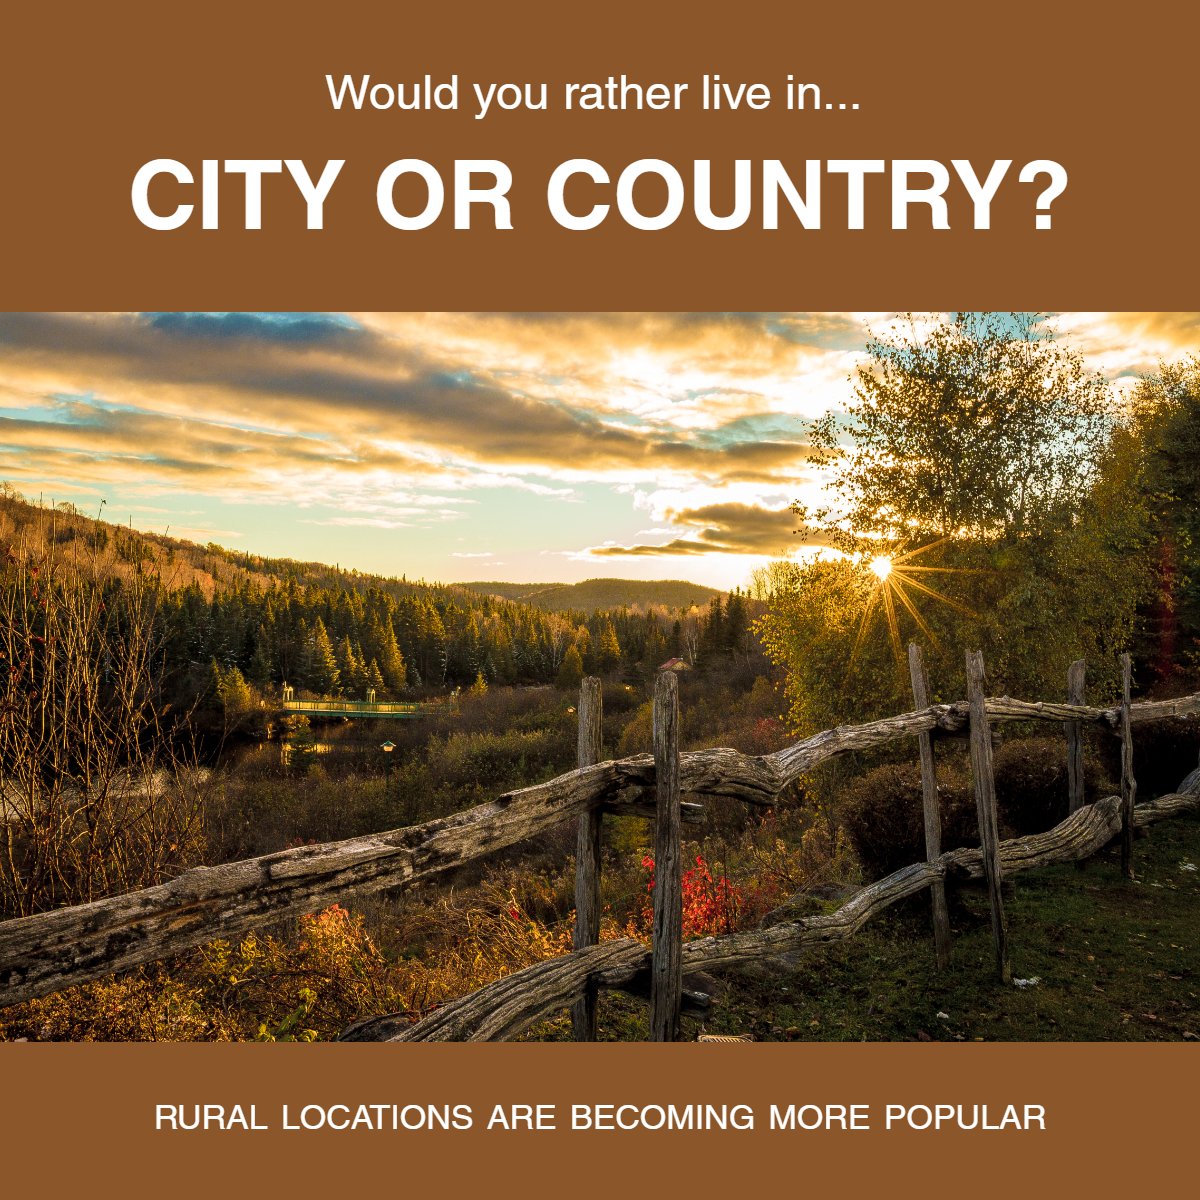 Would you rather live in the city or country? 🏙️🌄

#wouldyourather    #cityorcountry    #citylights    #realestatequestion    #realestate
#myhousefl #realestate #Floridarealestate #sellyourhouse #buyyourhome #JoelSantos #MVPREALTY #LehighAcresFlorida